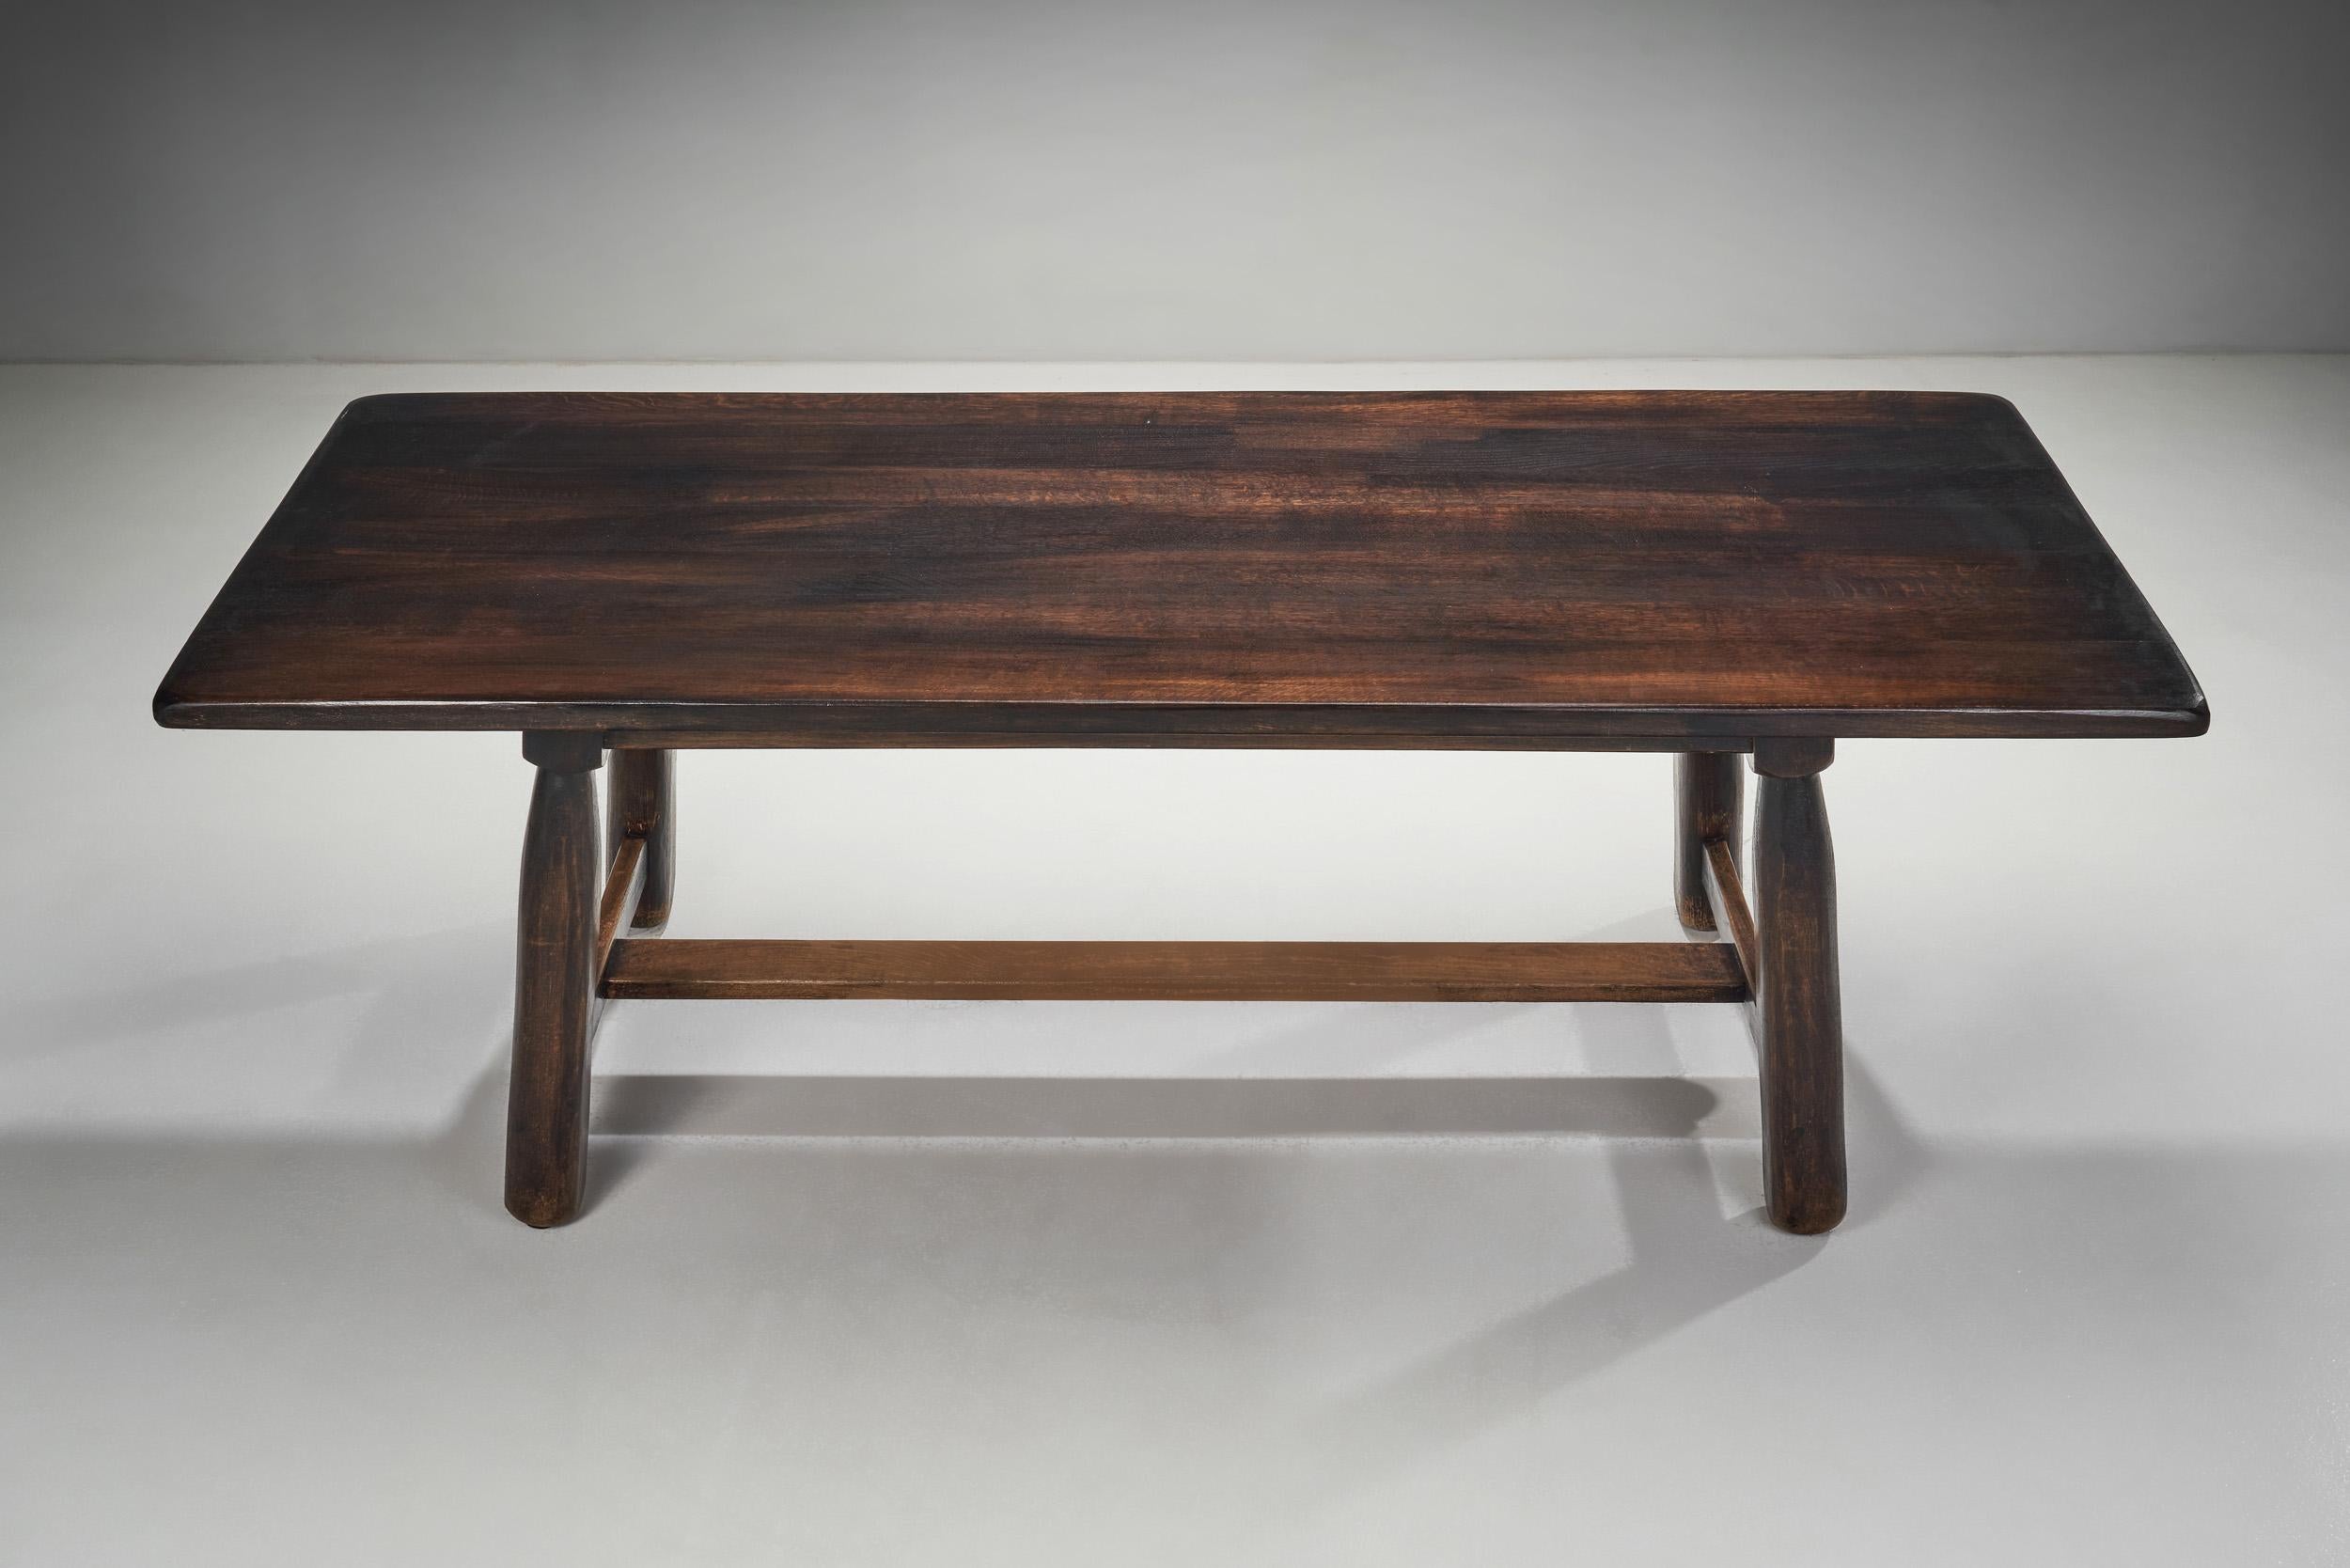 European Solid Wood Dining Table with Tenon and Mortise Joinery, Europe ca 1950s For Sale 1